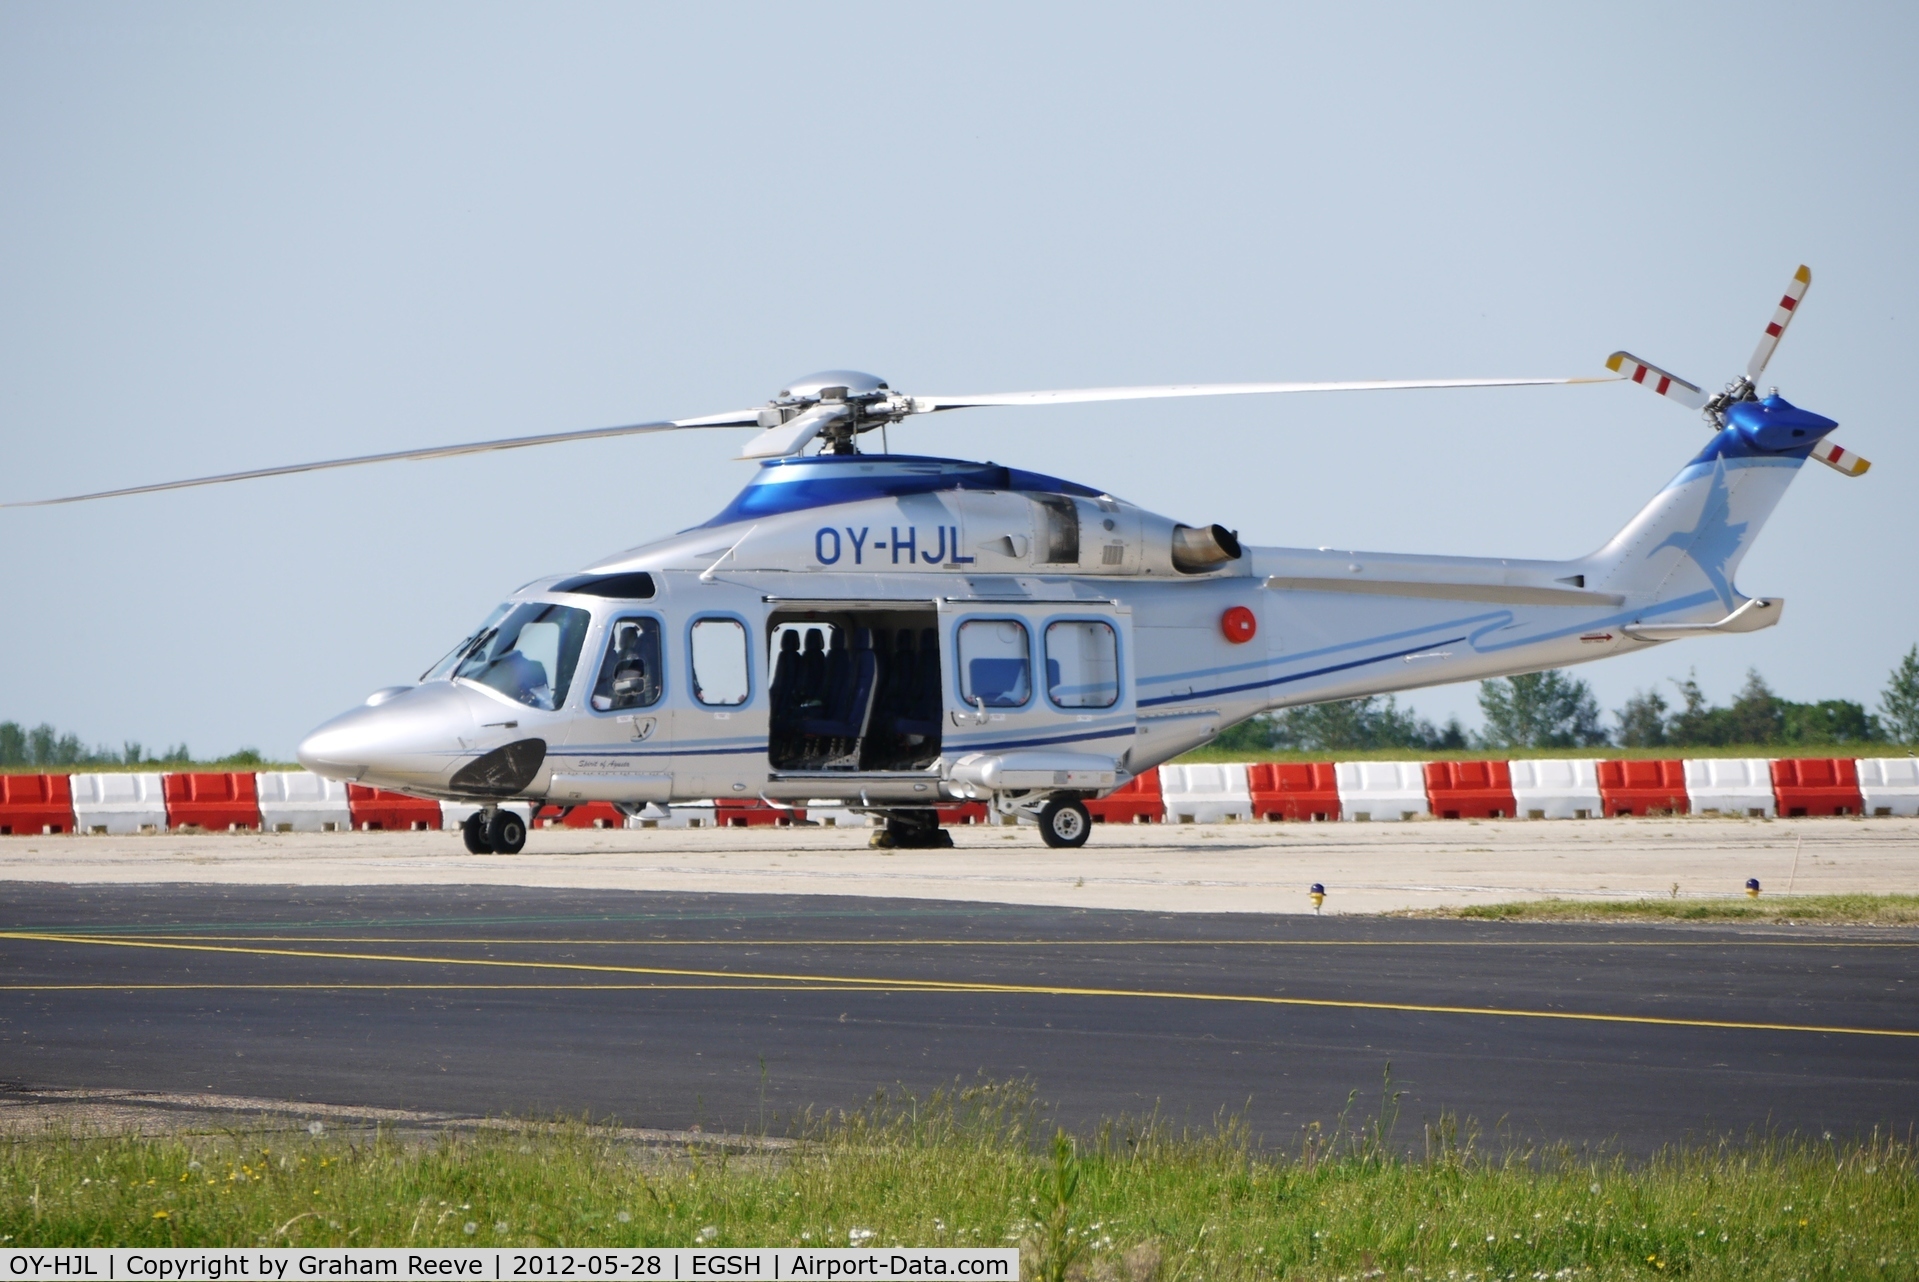 OY-HJL, 2009 AgustaWestland AW-139 C/N 31245, Parked in the sun.